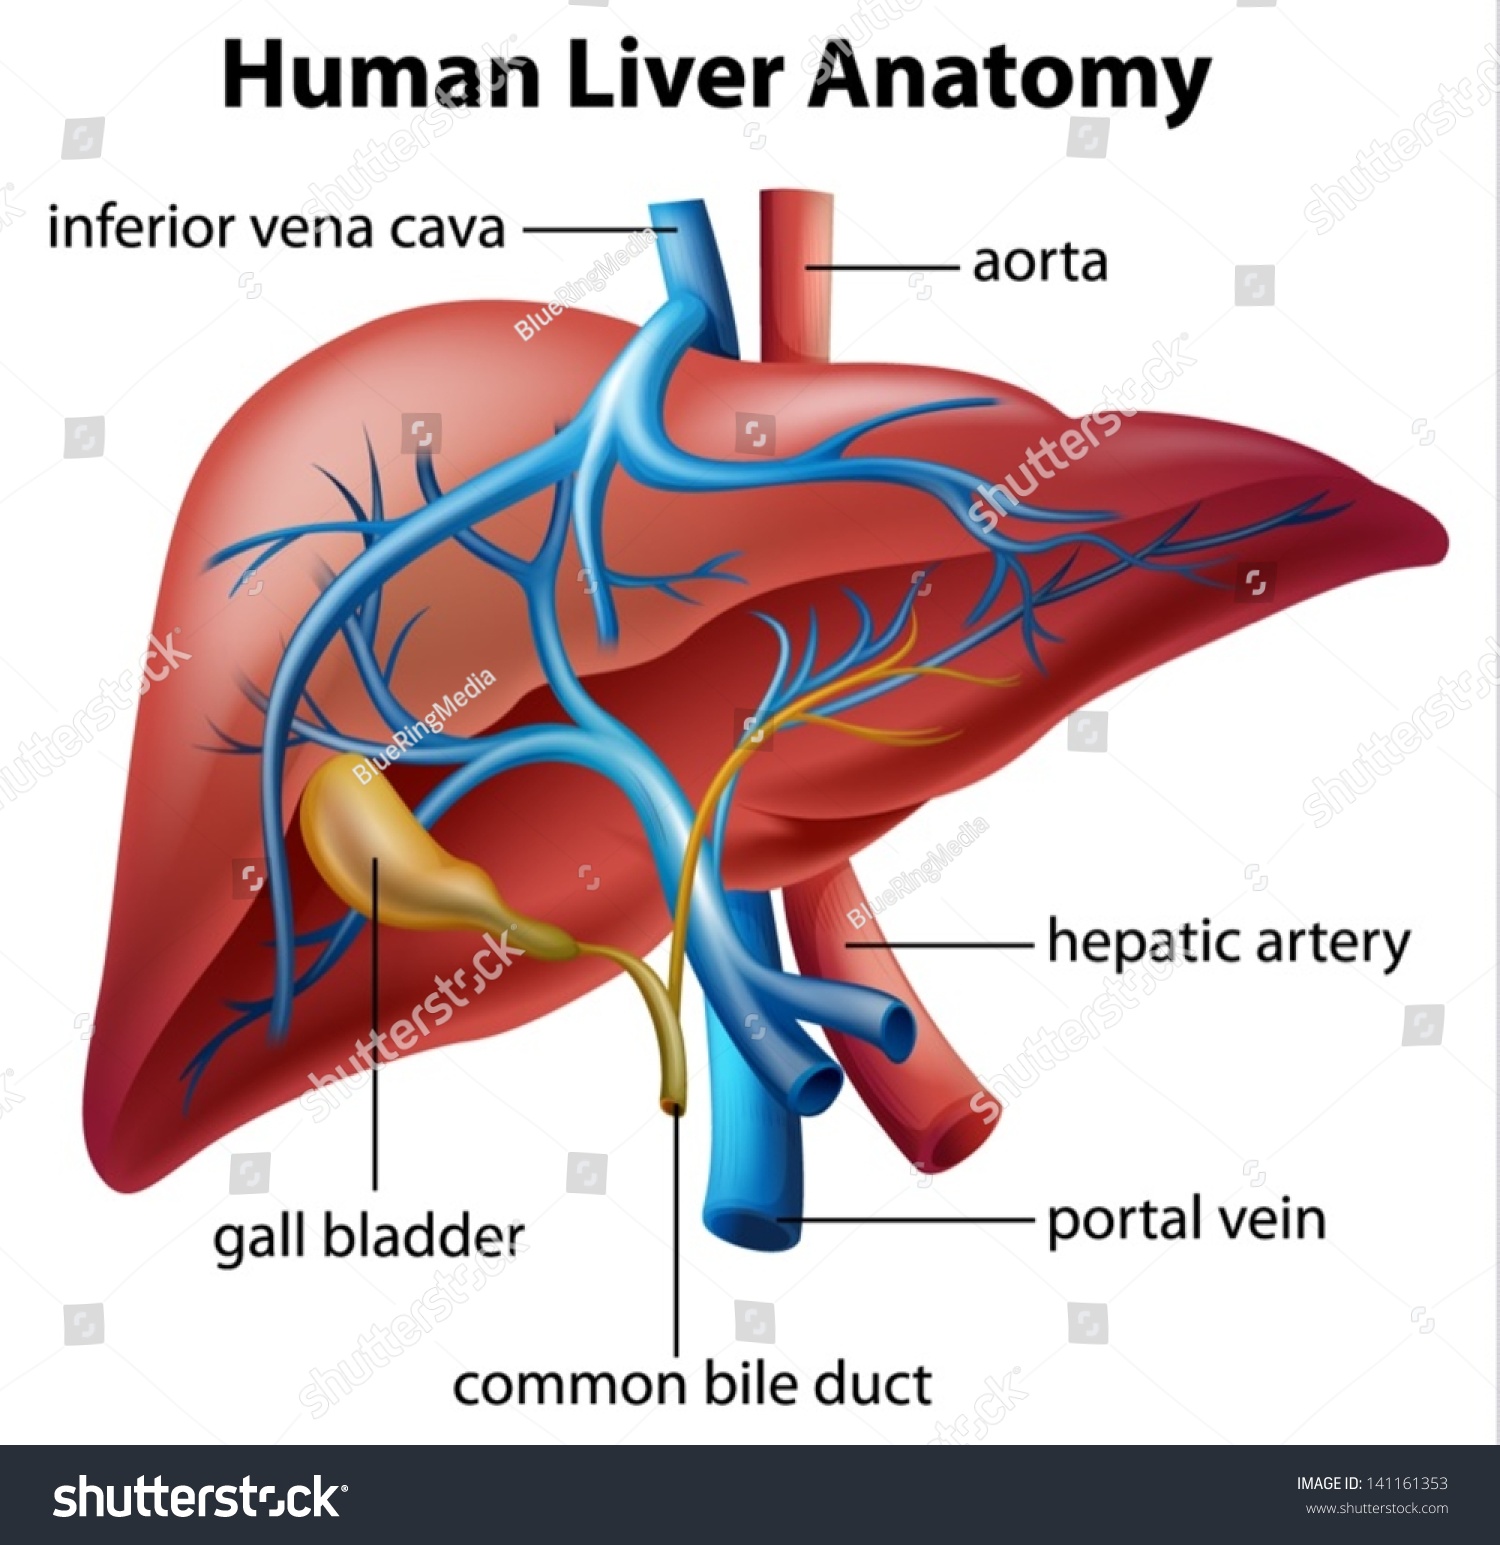 Illustration Of The Human Liver Anatomy - 141161353 : Shutterstock